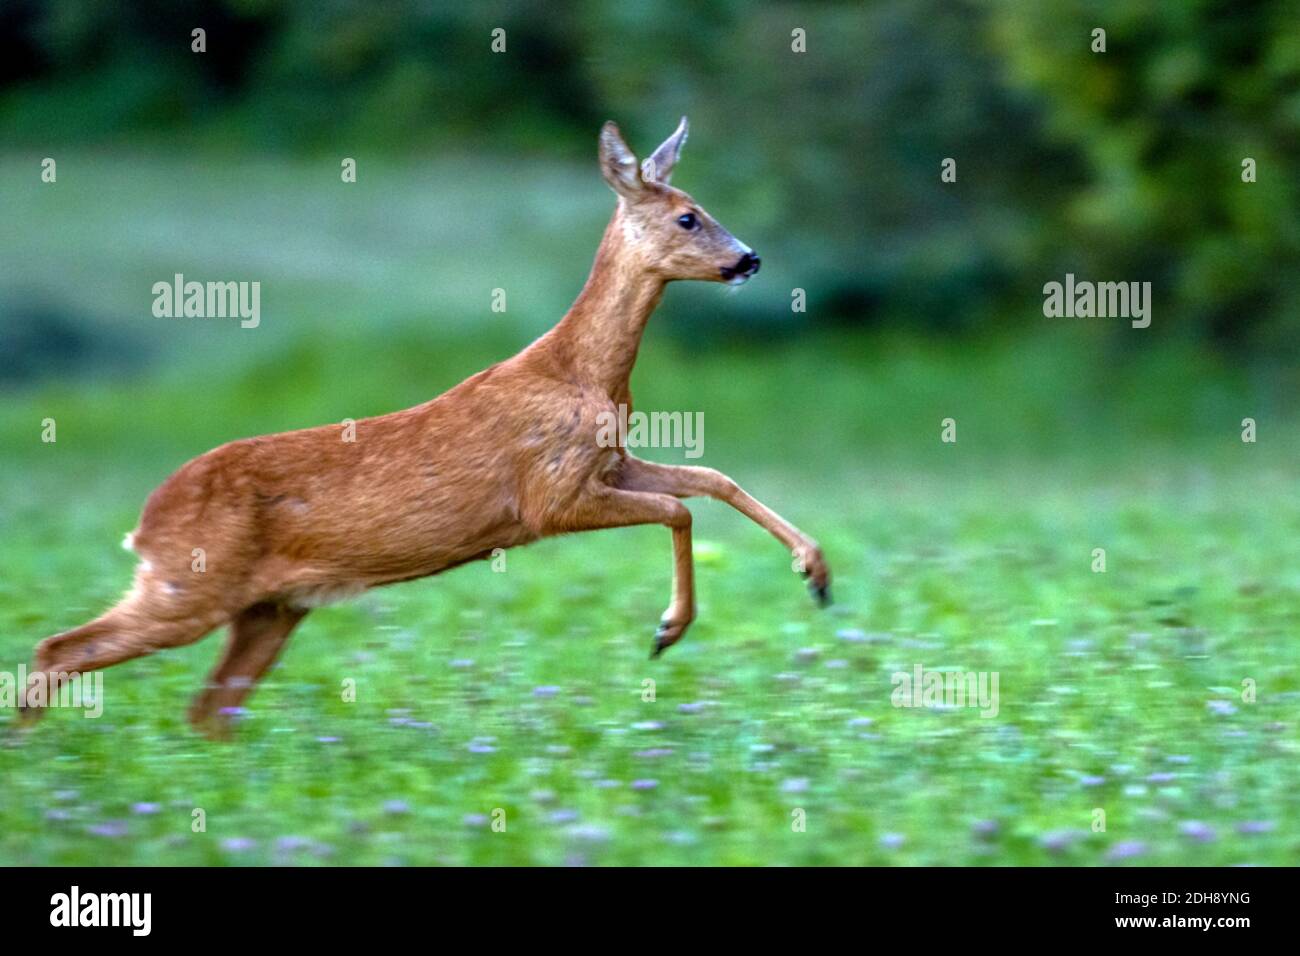 Absprung High Resolution Stock Photography and Images - Alamy